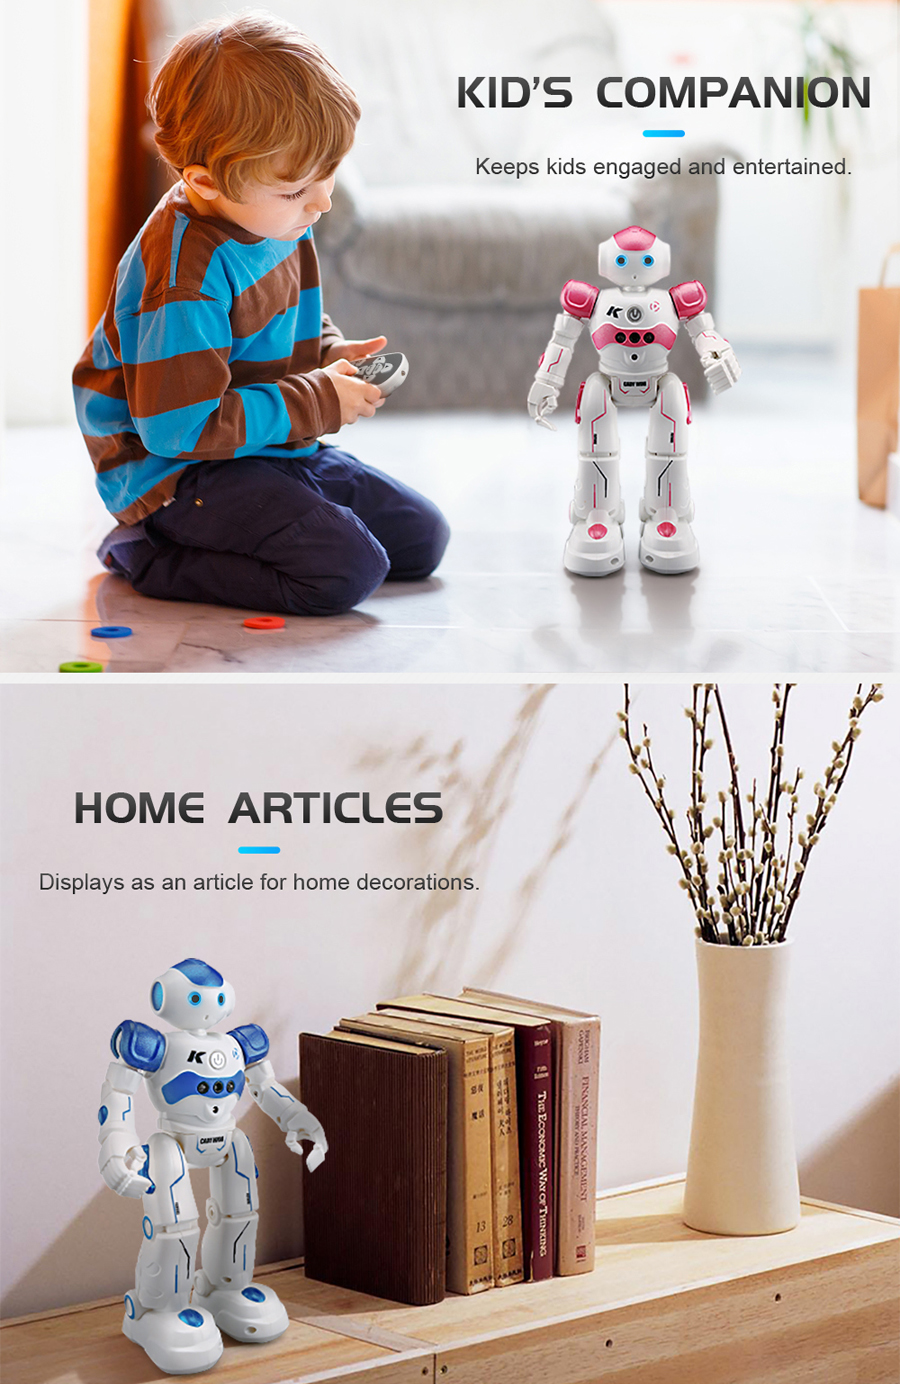 JJRC-R2-Cady-USB-Charging-Dancing-Gesture-Control-Robot-Toy-1181780-2